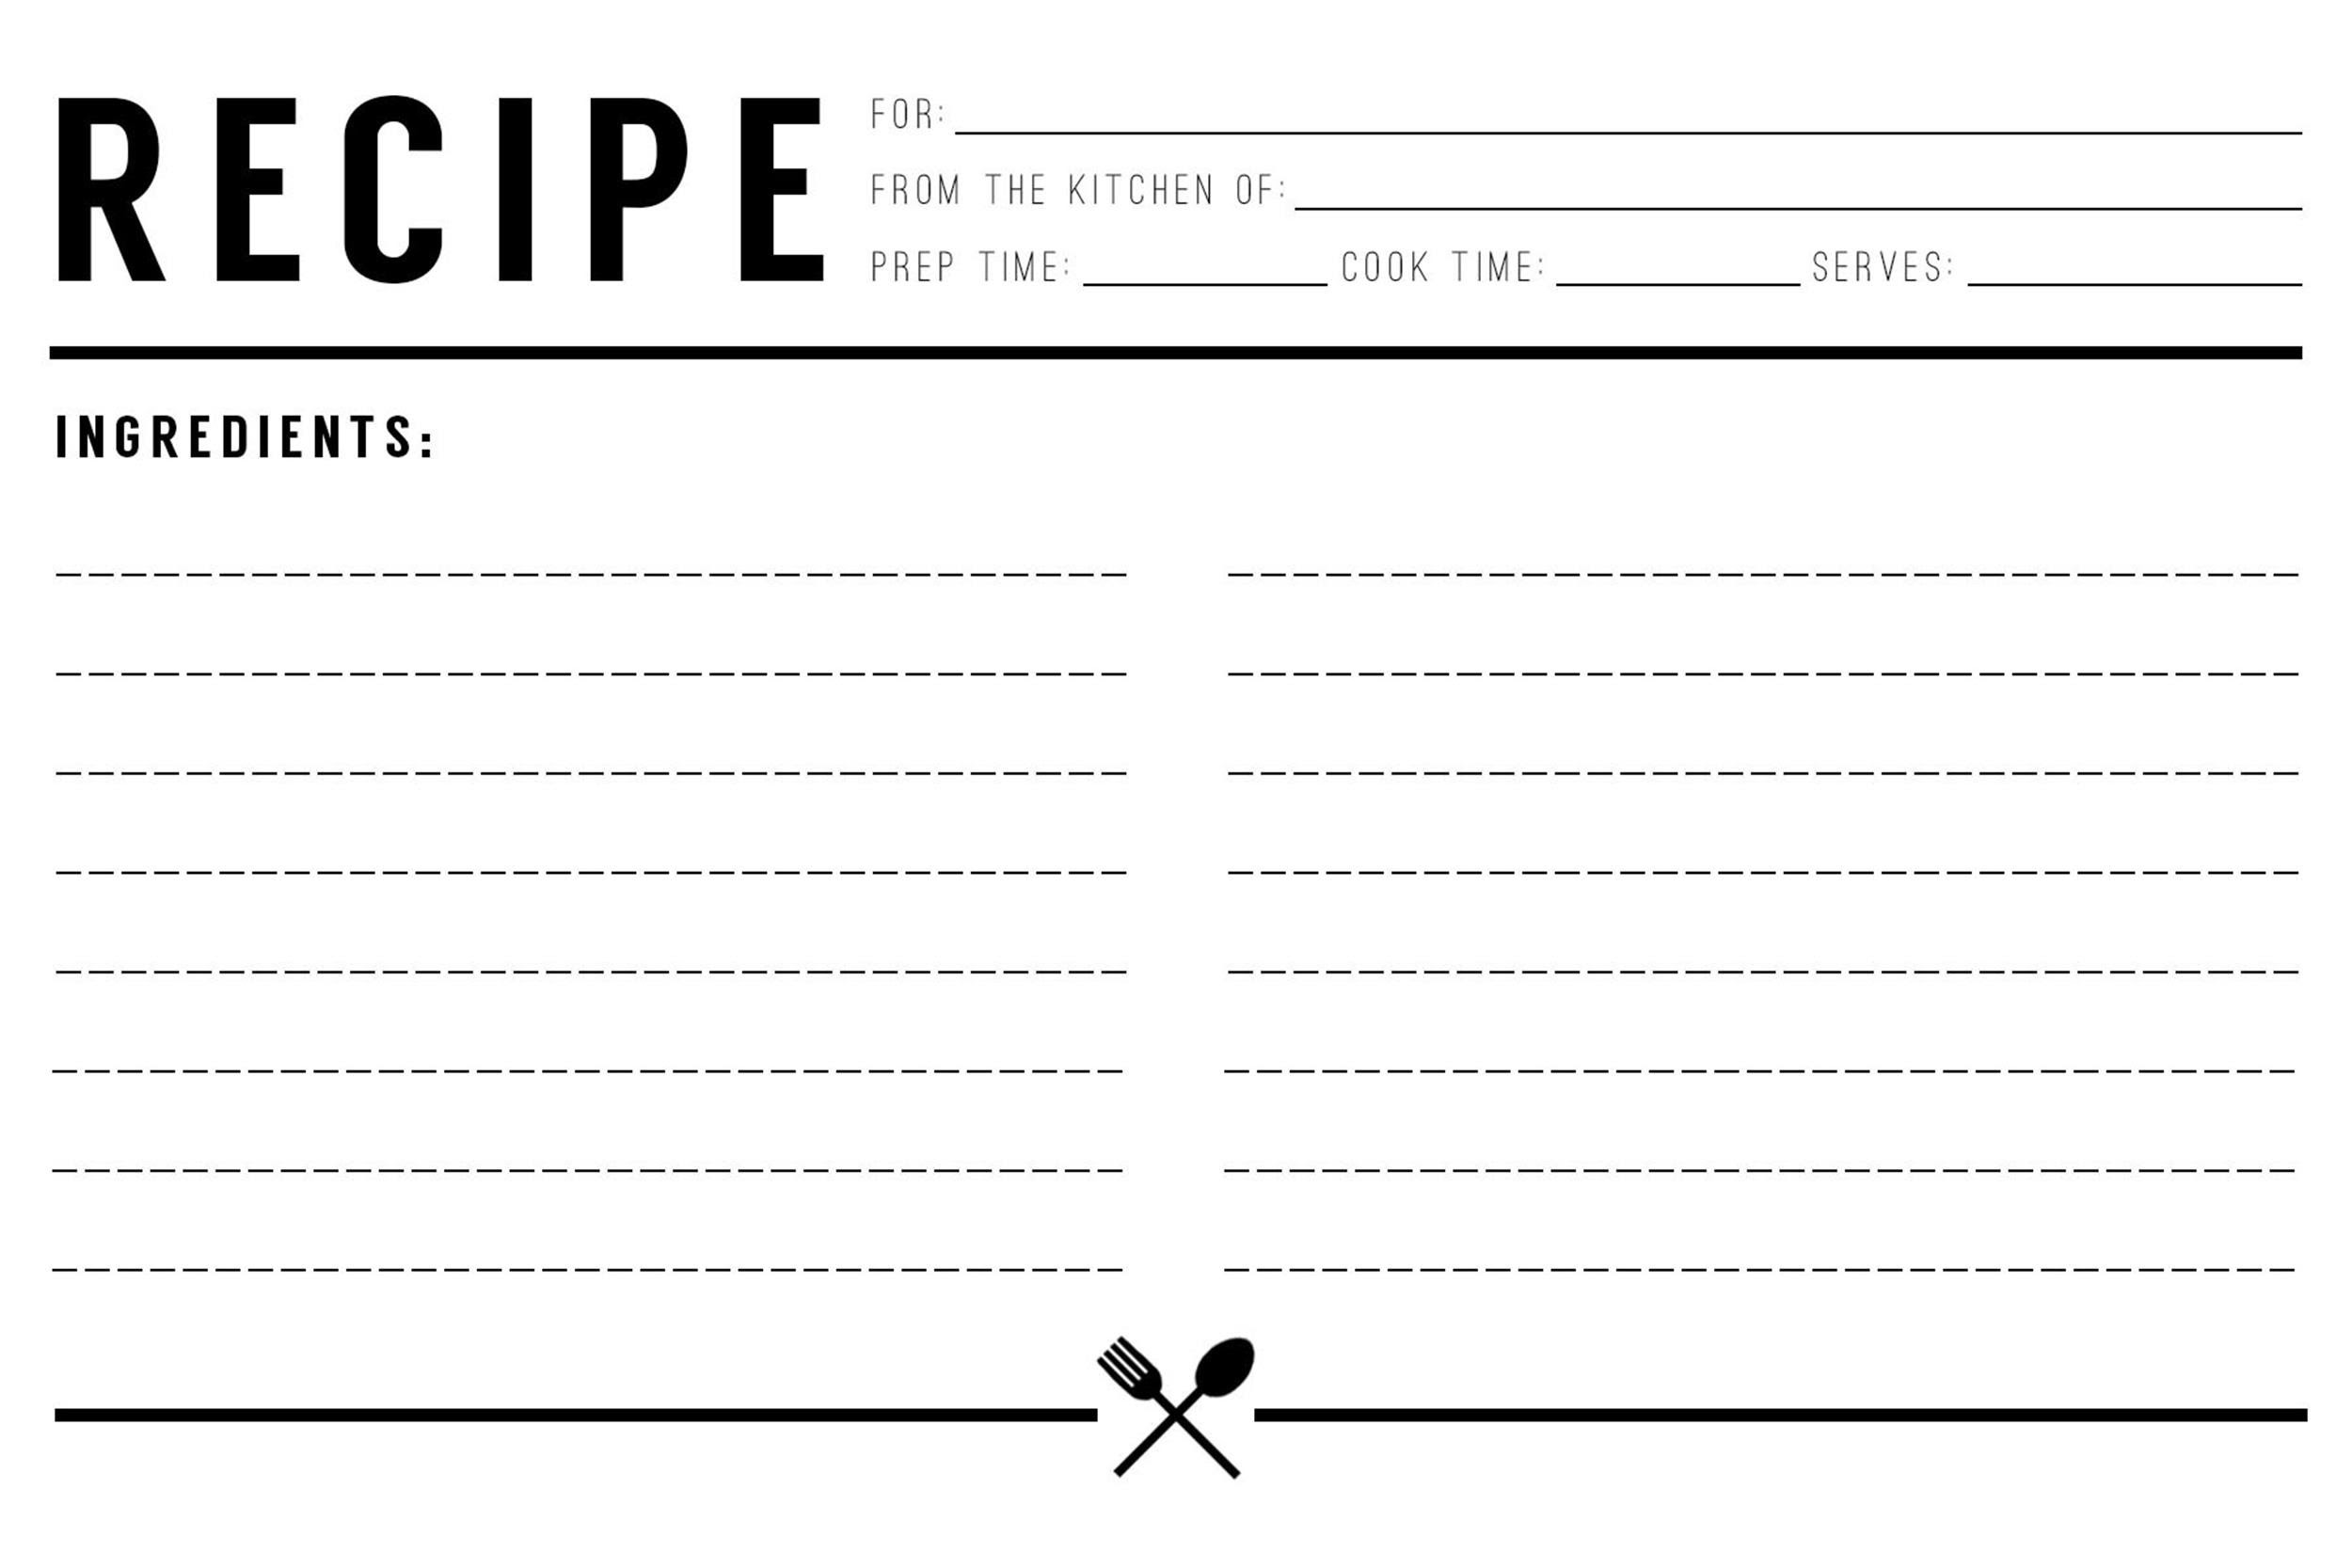 How To Type Recipe Cards In Word - Image Of Food Recipe Within Full Page Recipe Template For Word